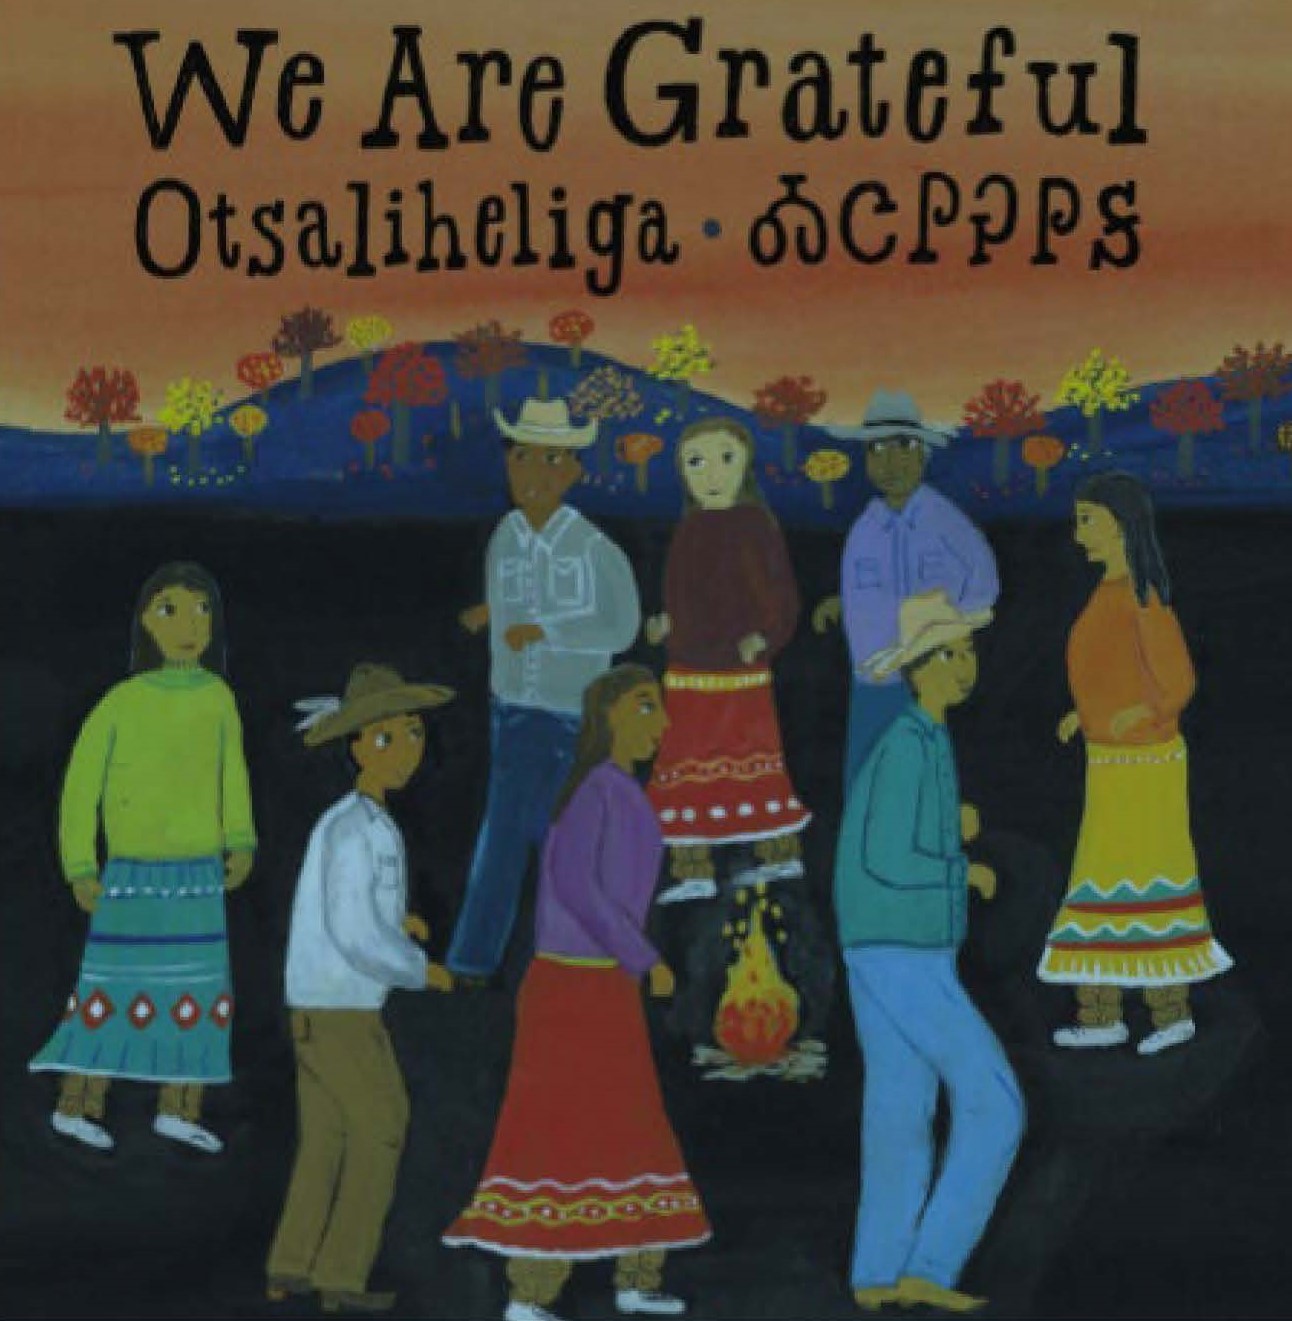 The cover of a book titled "We Are Grateful Otsaliheliga". Cover art includes multiple people walking around a fire with mountains and trees during autumn in the distance.